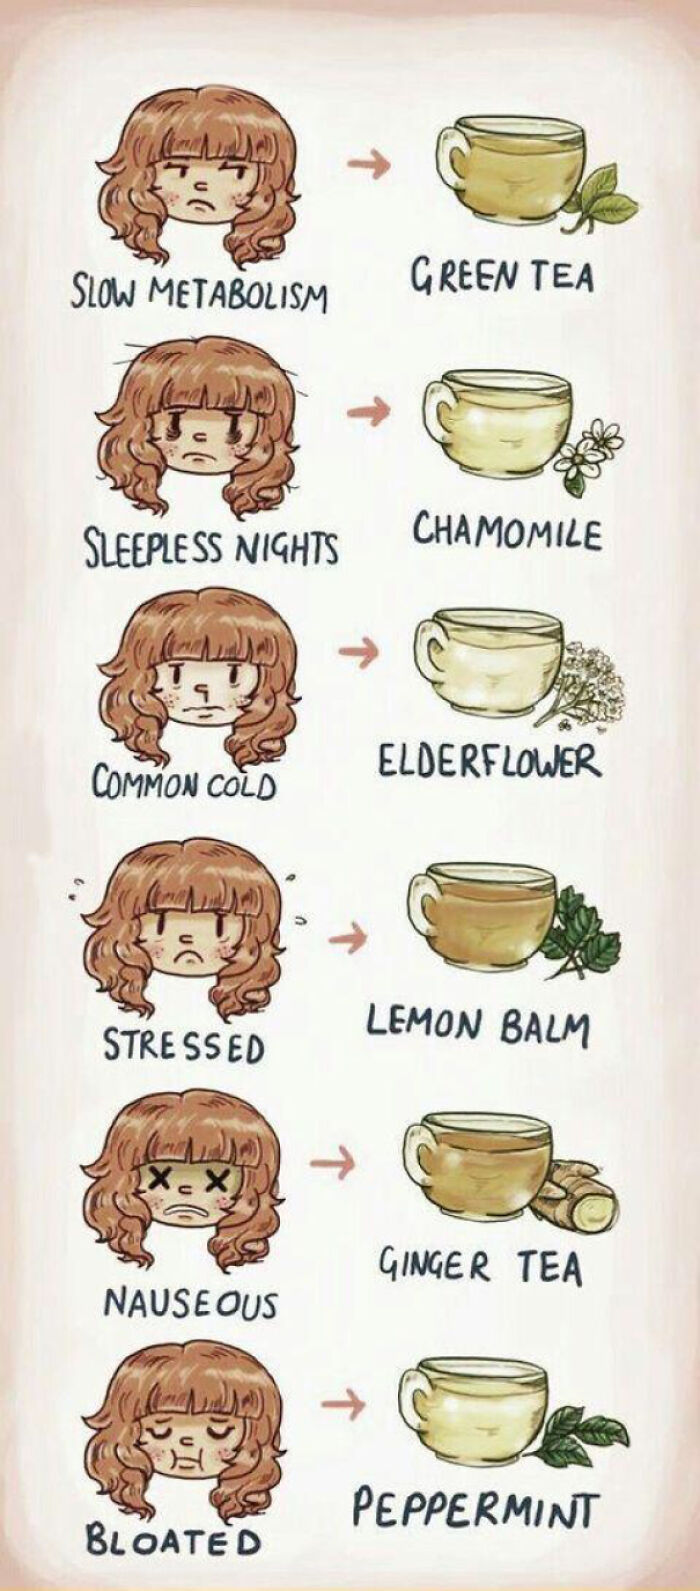 A Quick Guide To Tea!